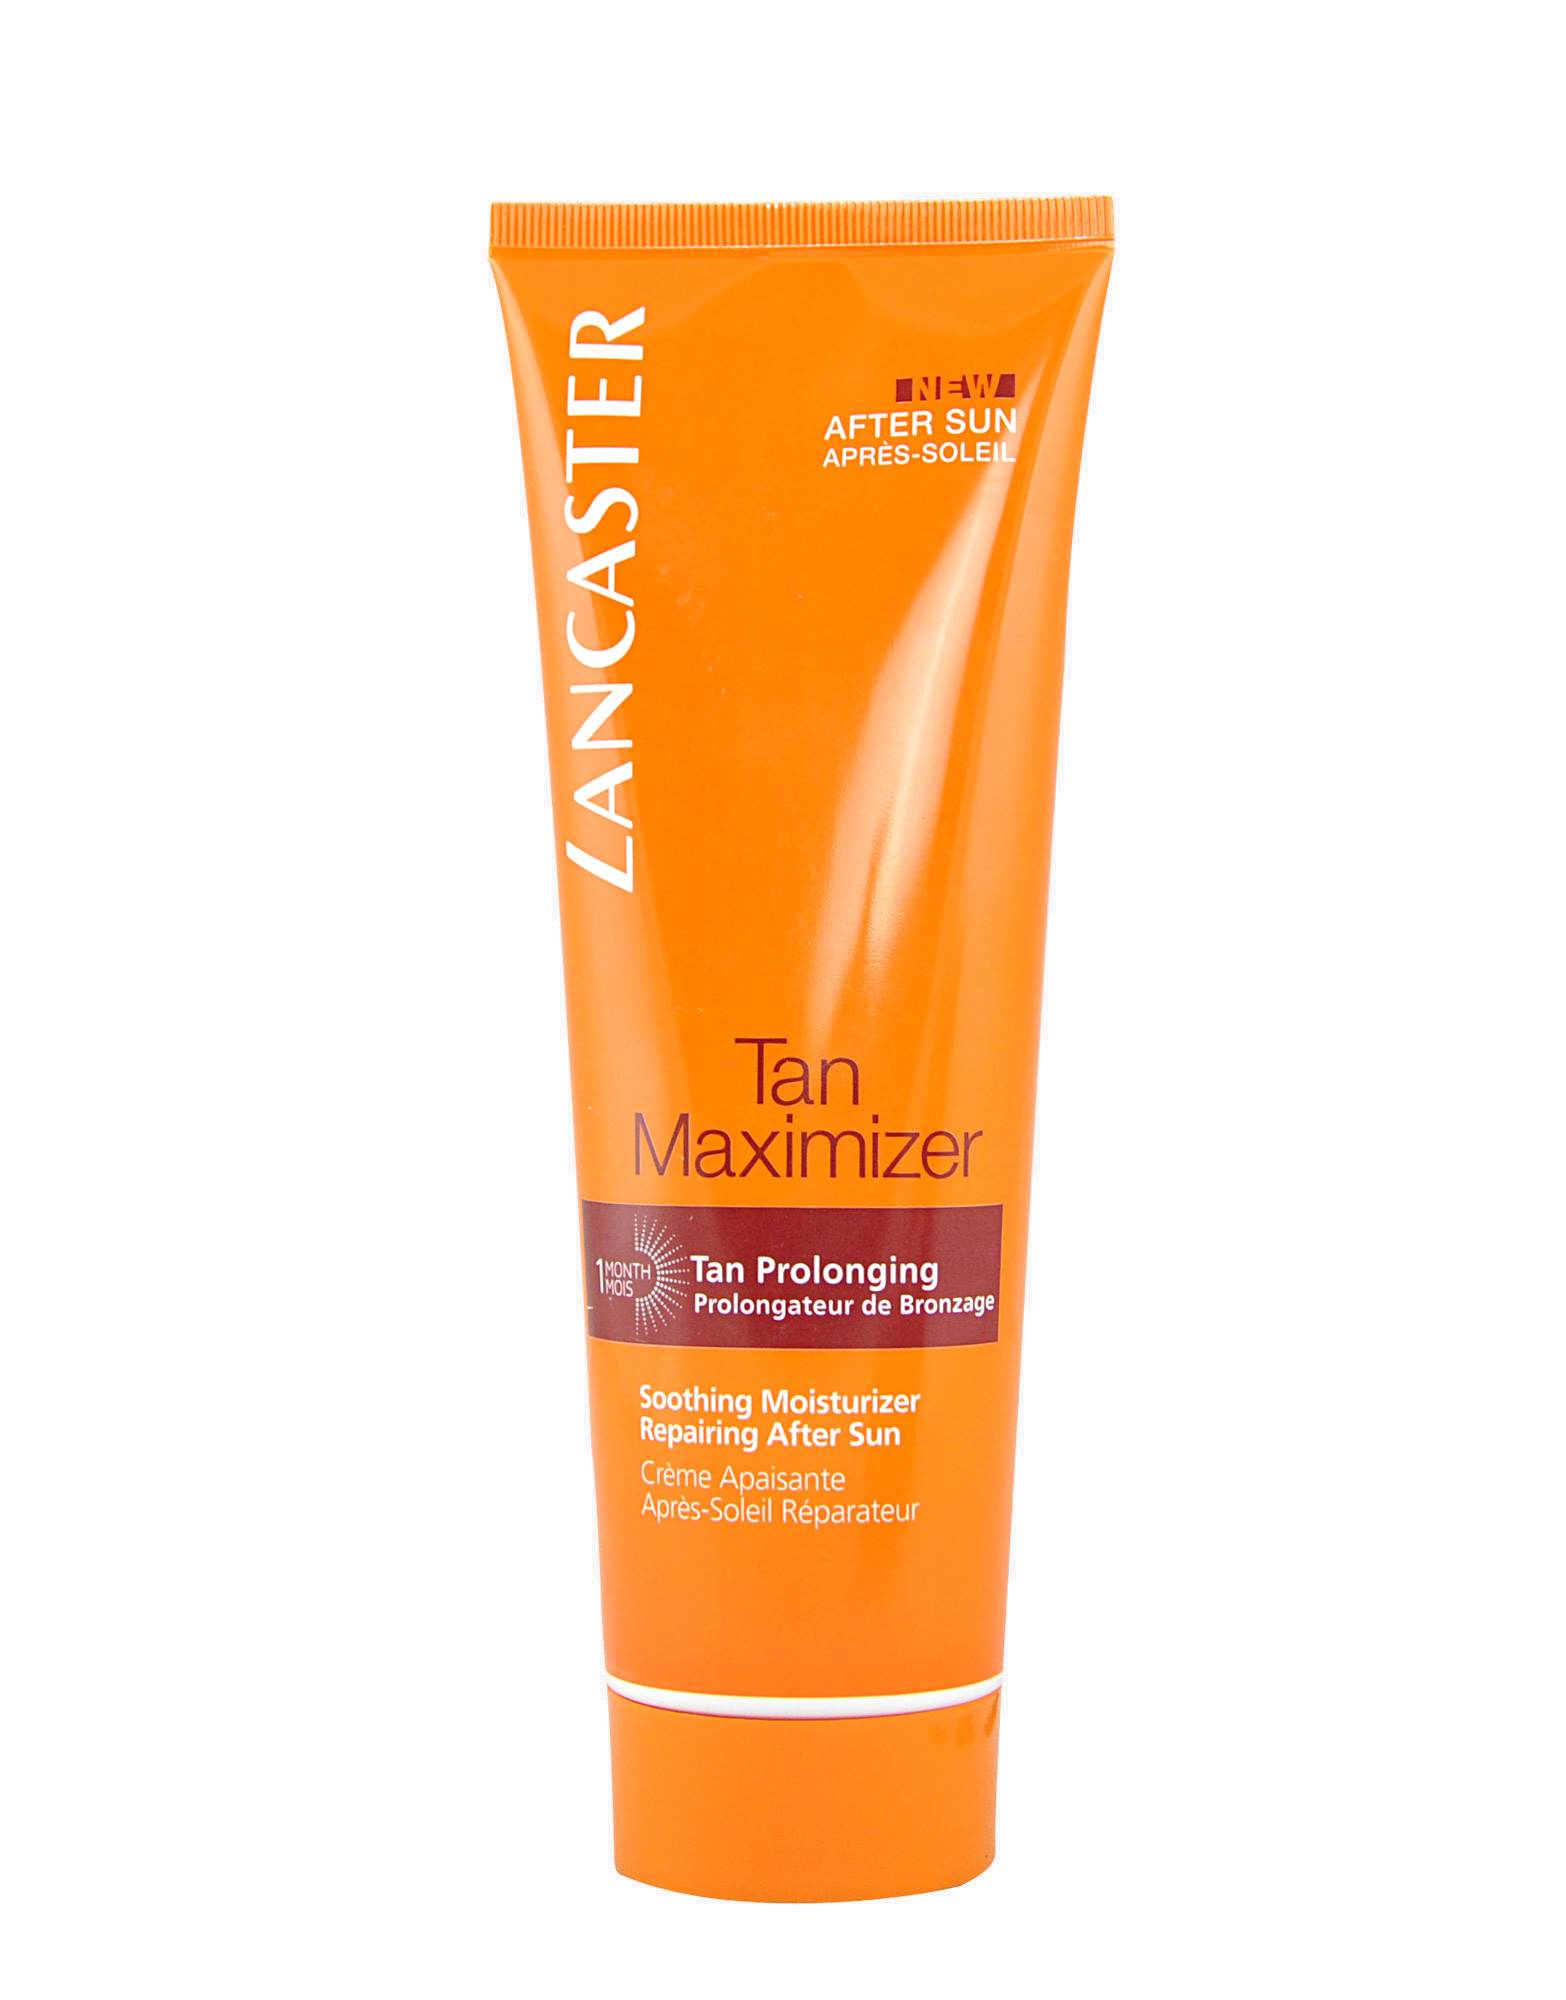 After Sun Tan Maximizer - Soothing Moisturizer Repairing After Sun by  Lancaster, 250ml